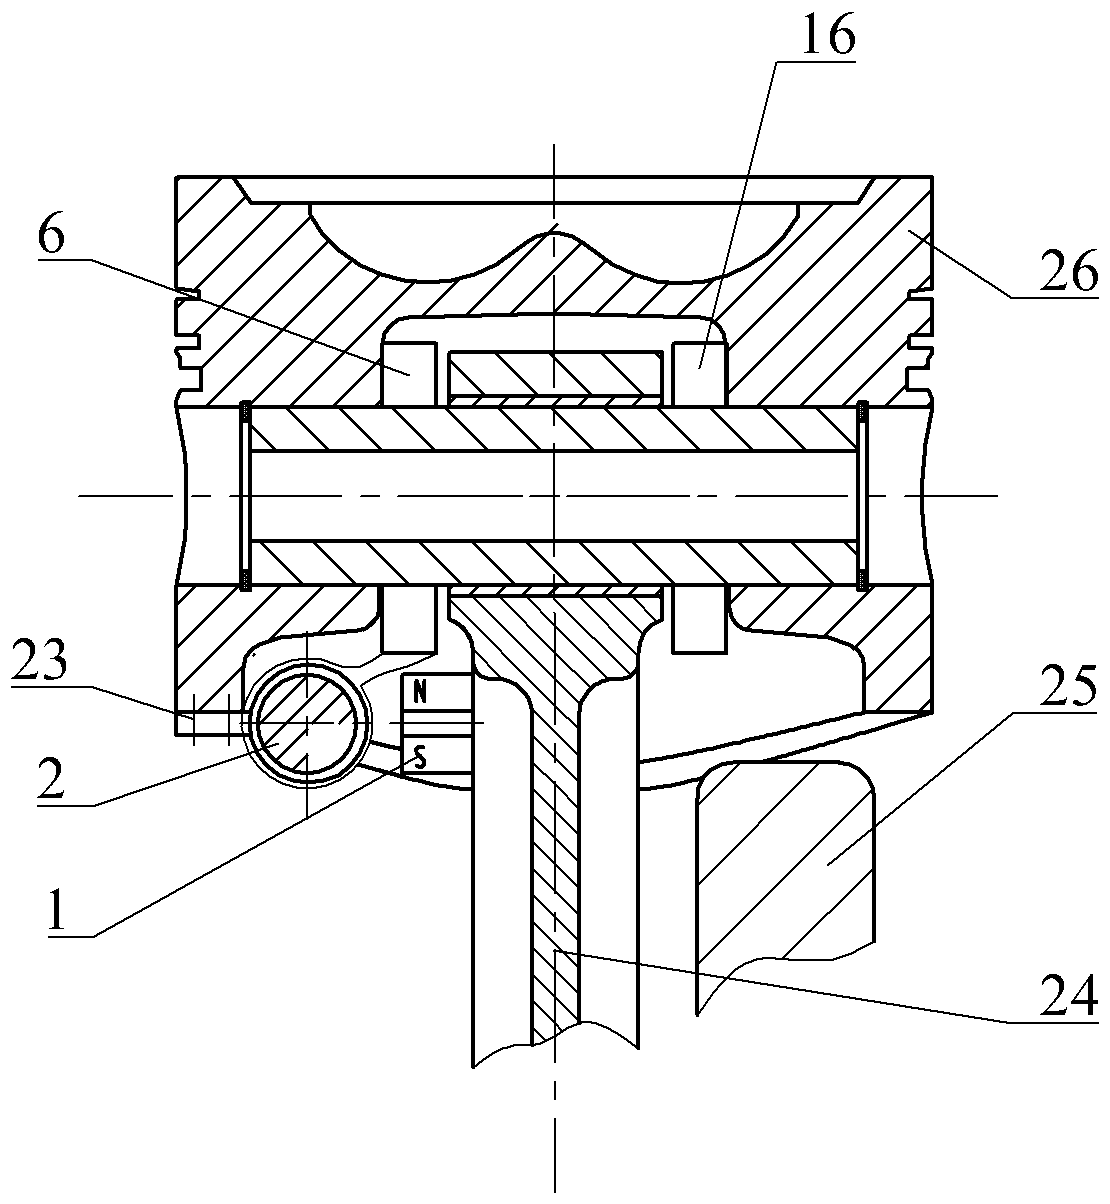 Internal Combustion Engine Piston Temperature Self-Powered Wireless Telemetry Device